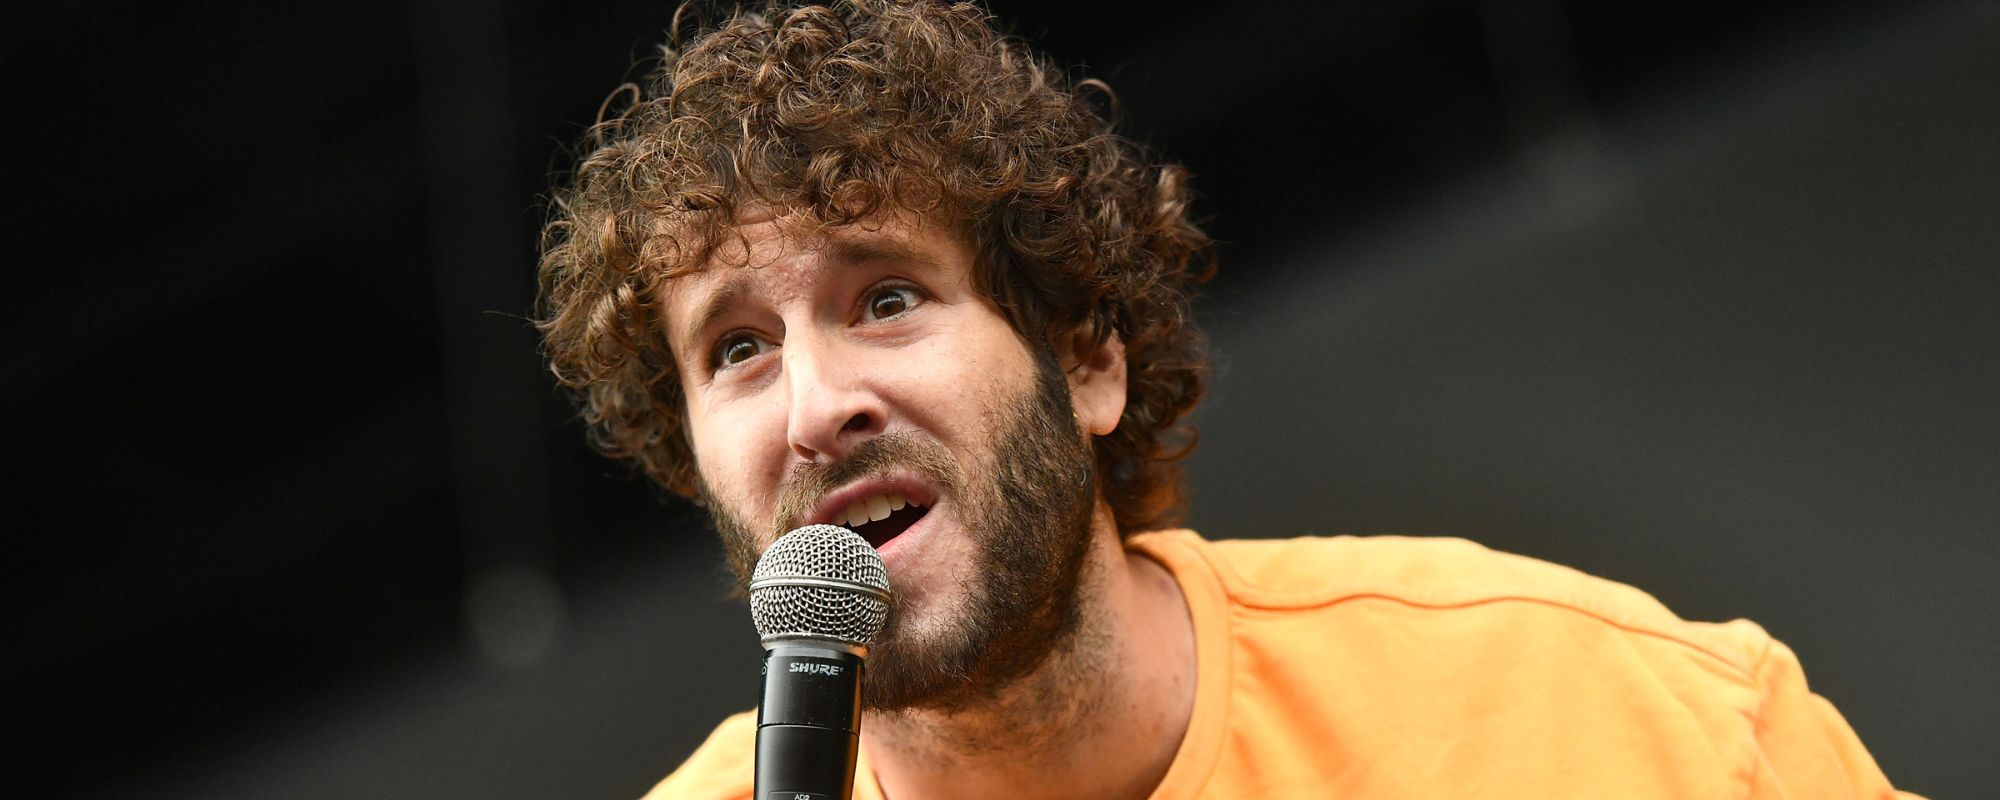 Lil Dicky Announces New Album Full of Songs from His Show ‘Dave’